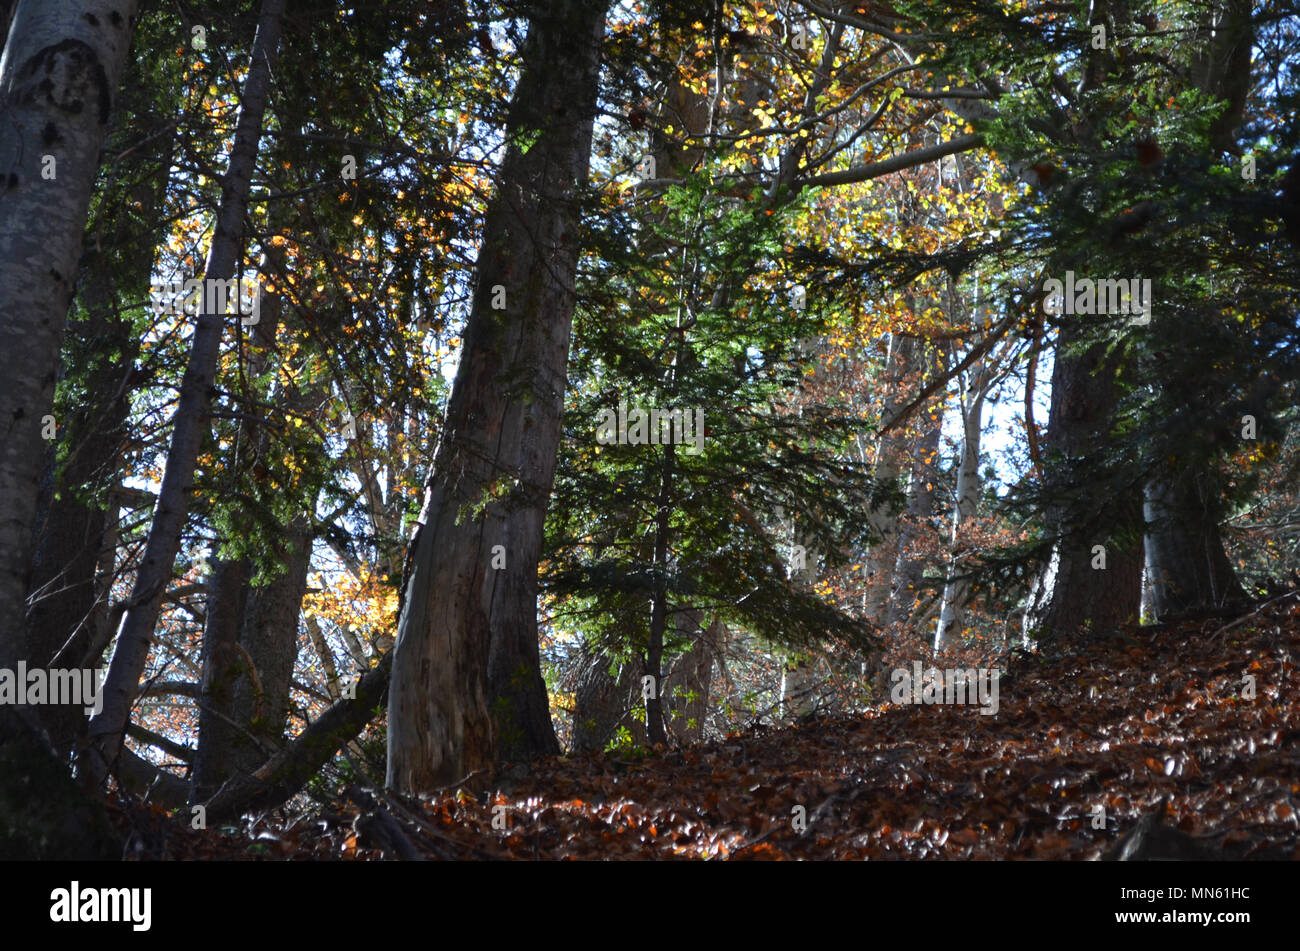 Autumn colors in the mixed forests of Posets-Maladeta Natural Park, Spanish Pyrenees Stock Photo